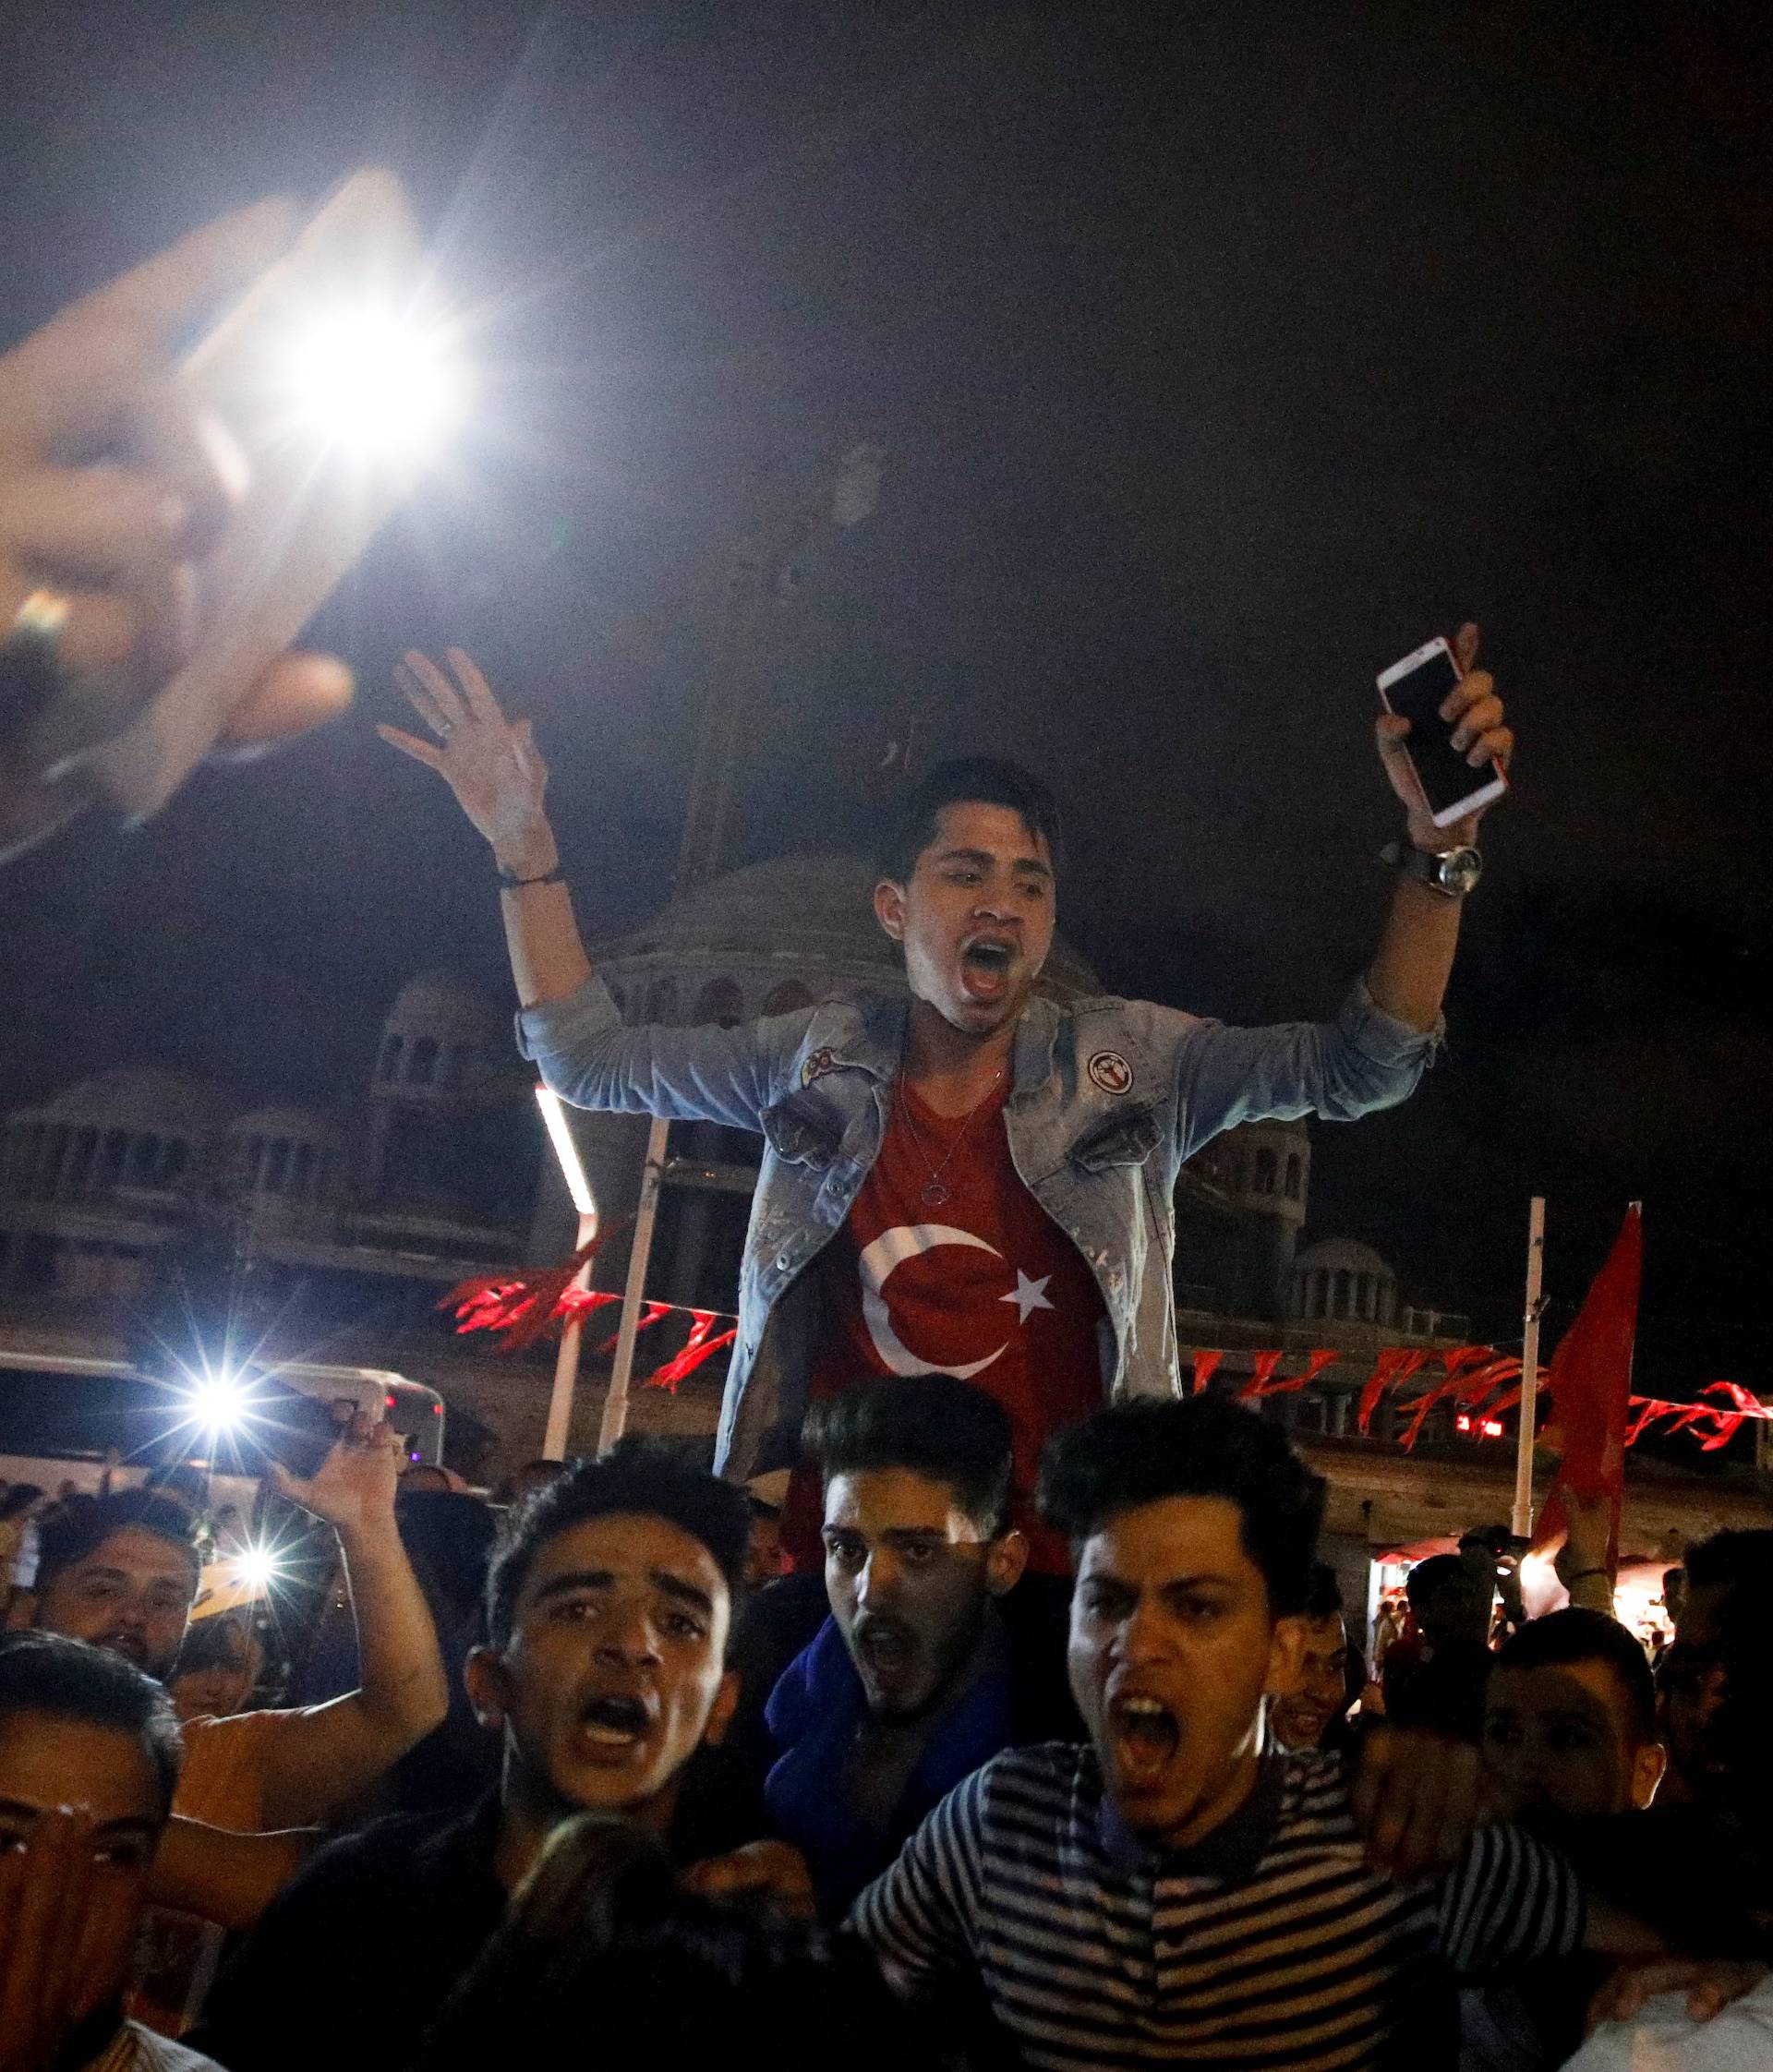 Supporters of Turkish President Tayyip Erdogan celebrate at Taksim square in Istanbul